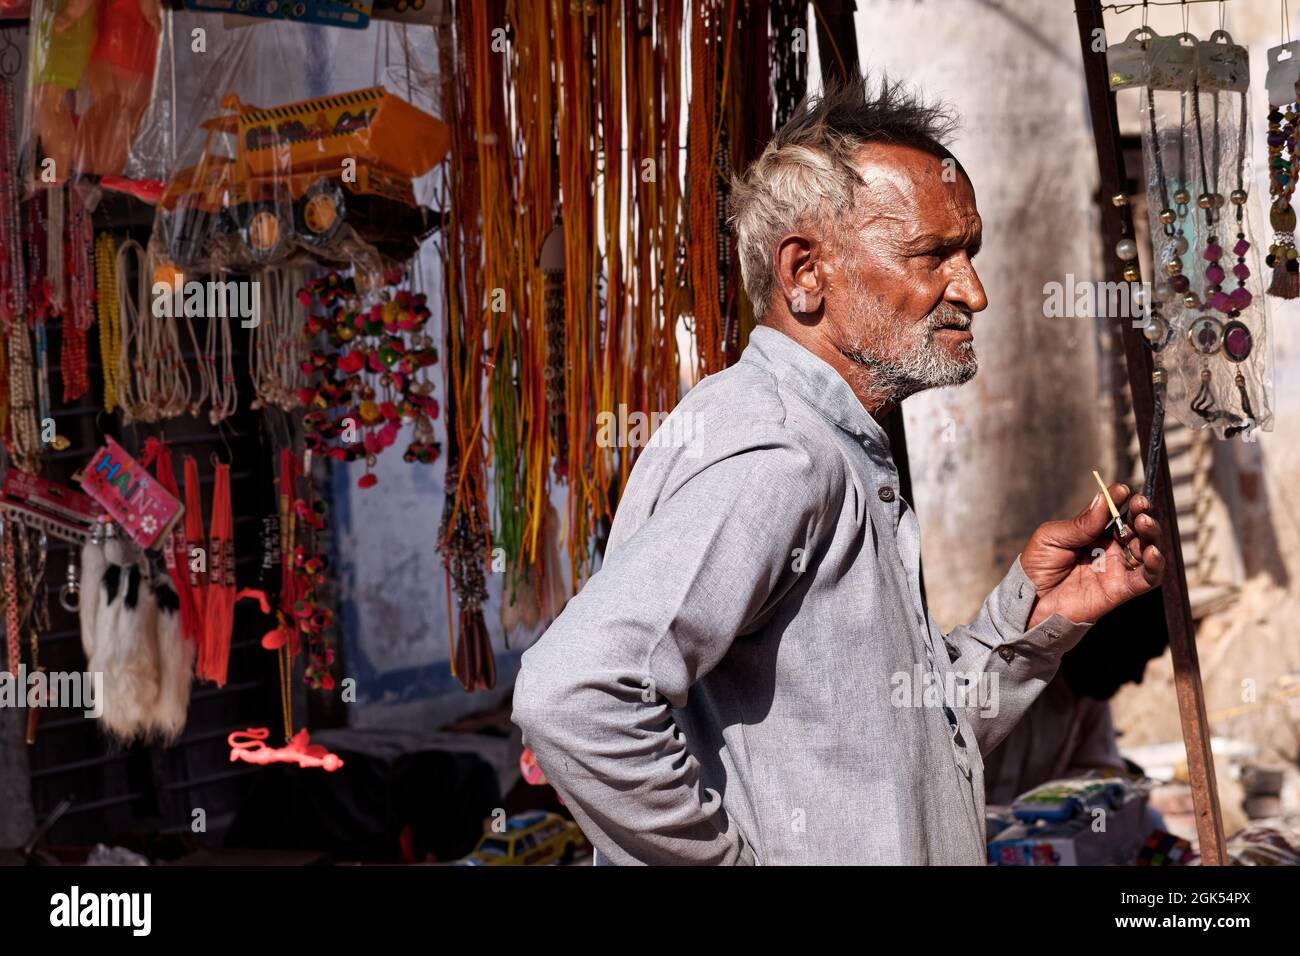 Orchha, Madhya Pradesh, India - March 2019: An elderly Indian man standing outside a shop and smoking a bidi cigarette. Stock Photo